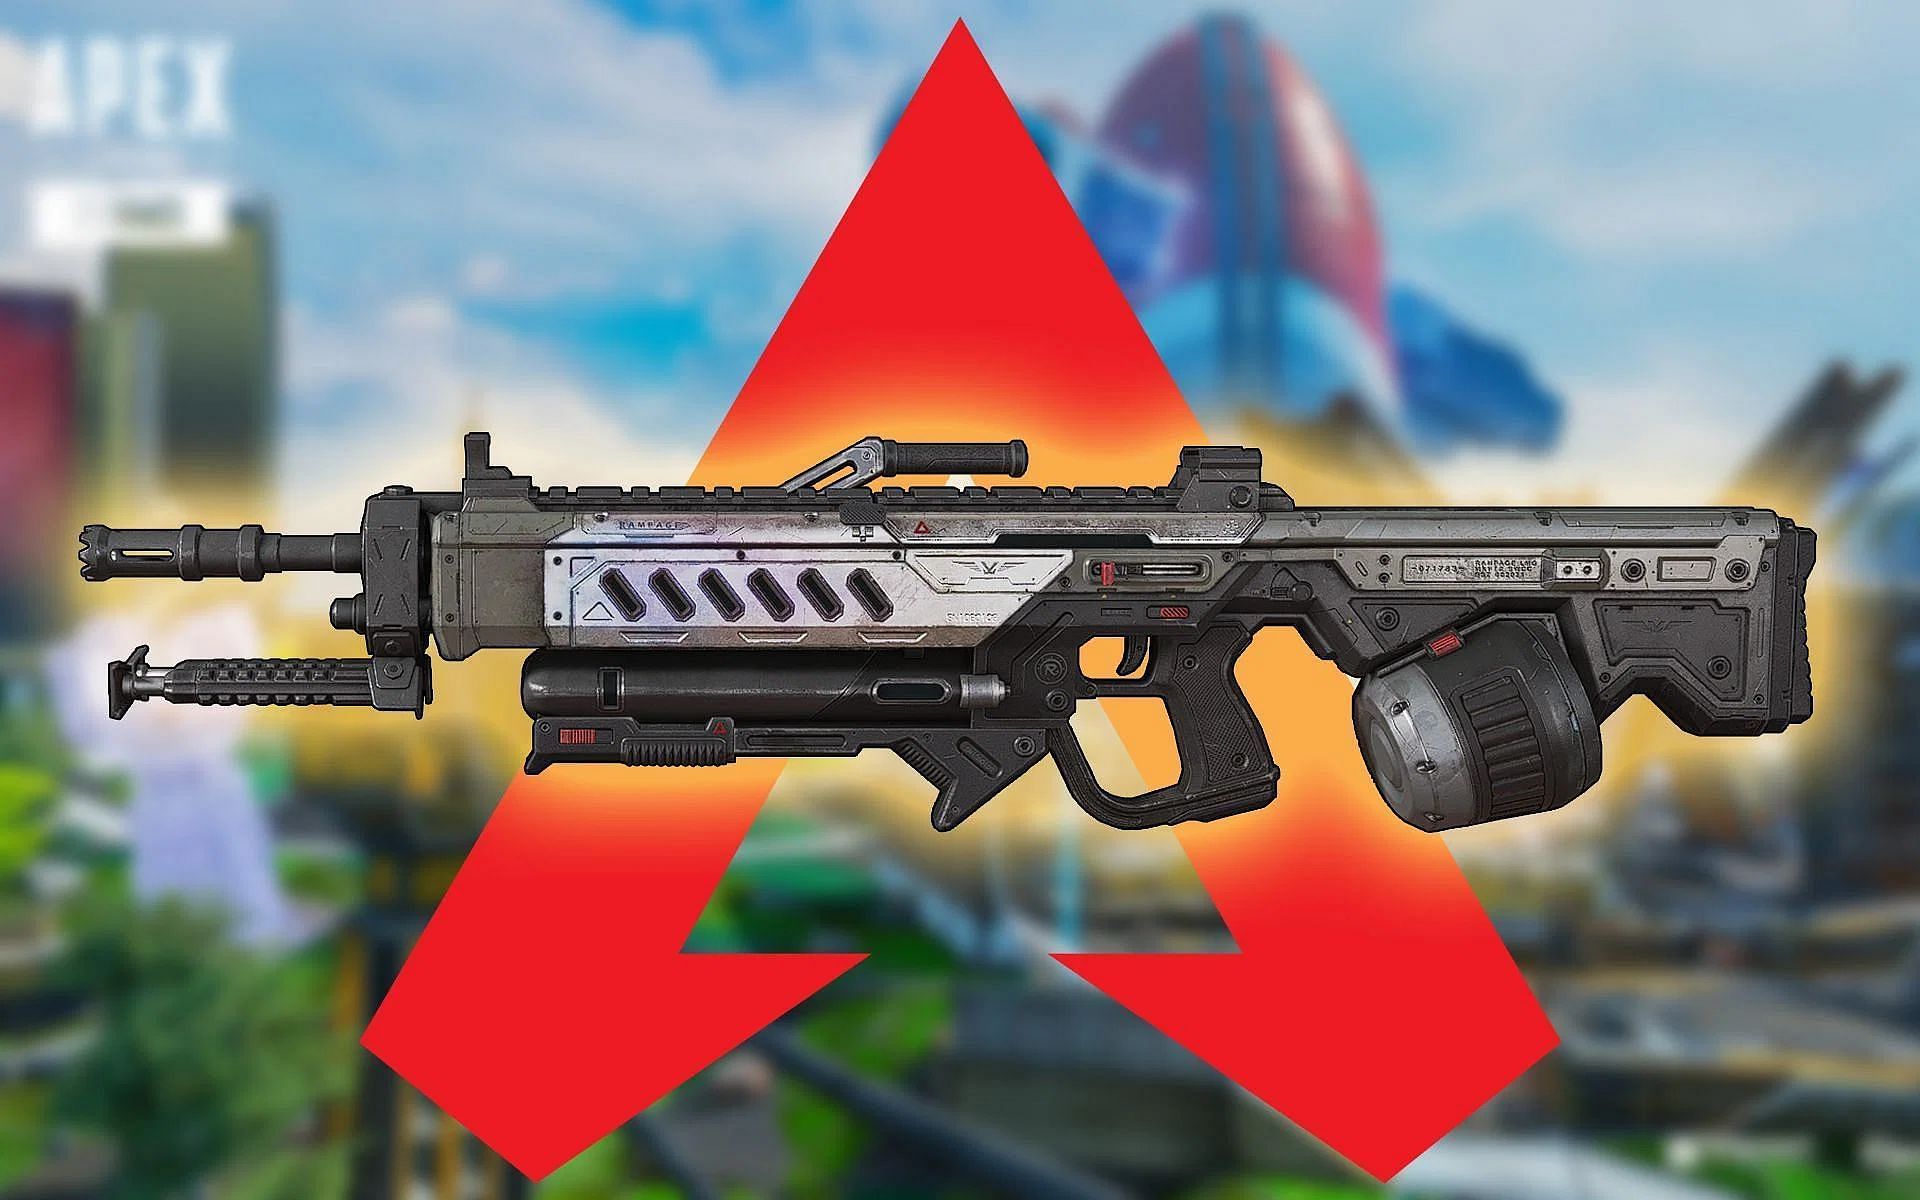 Another exploit has been discovered for the Rampage weapon in Apex Legends (Image via Respawn Entertainment)